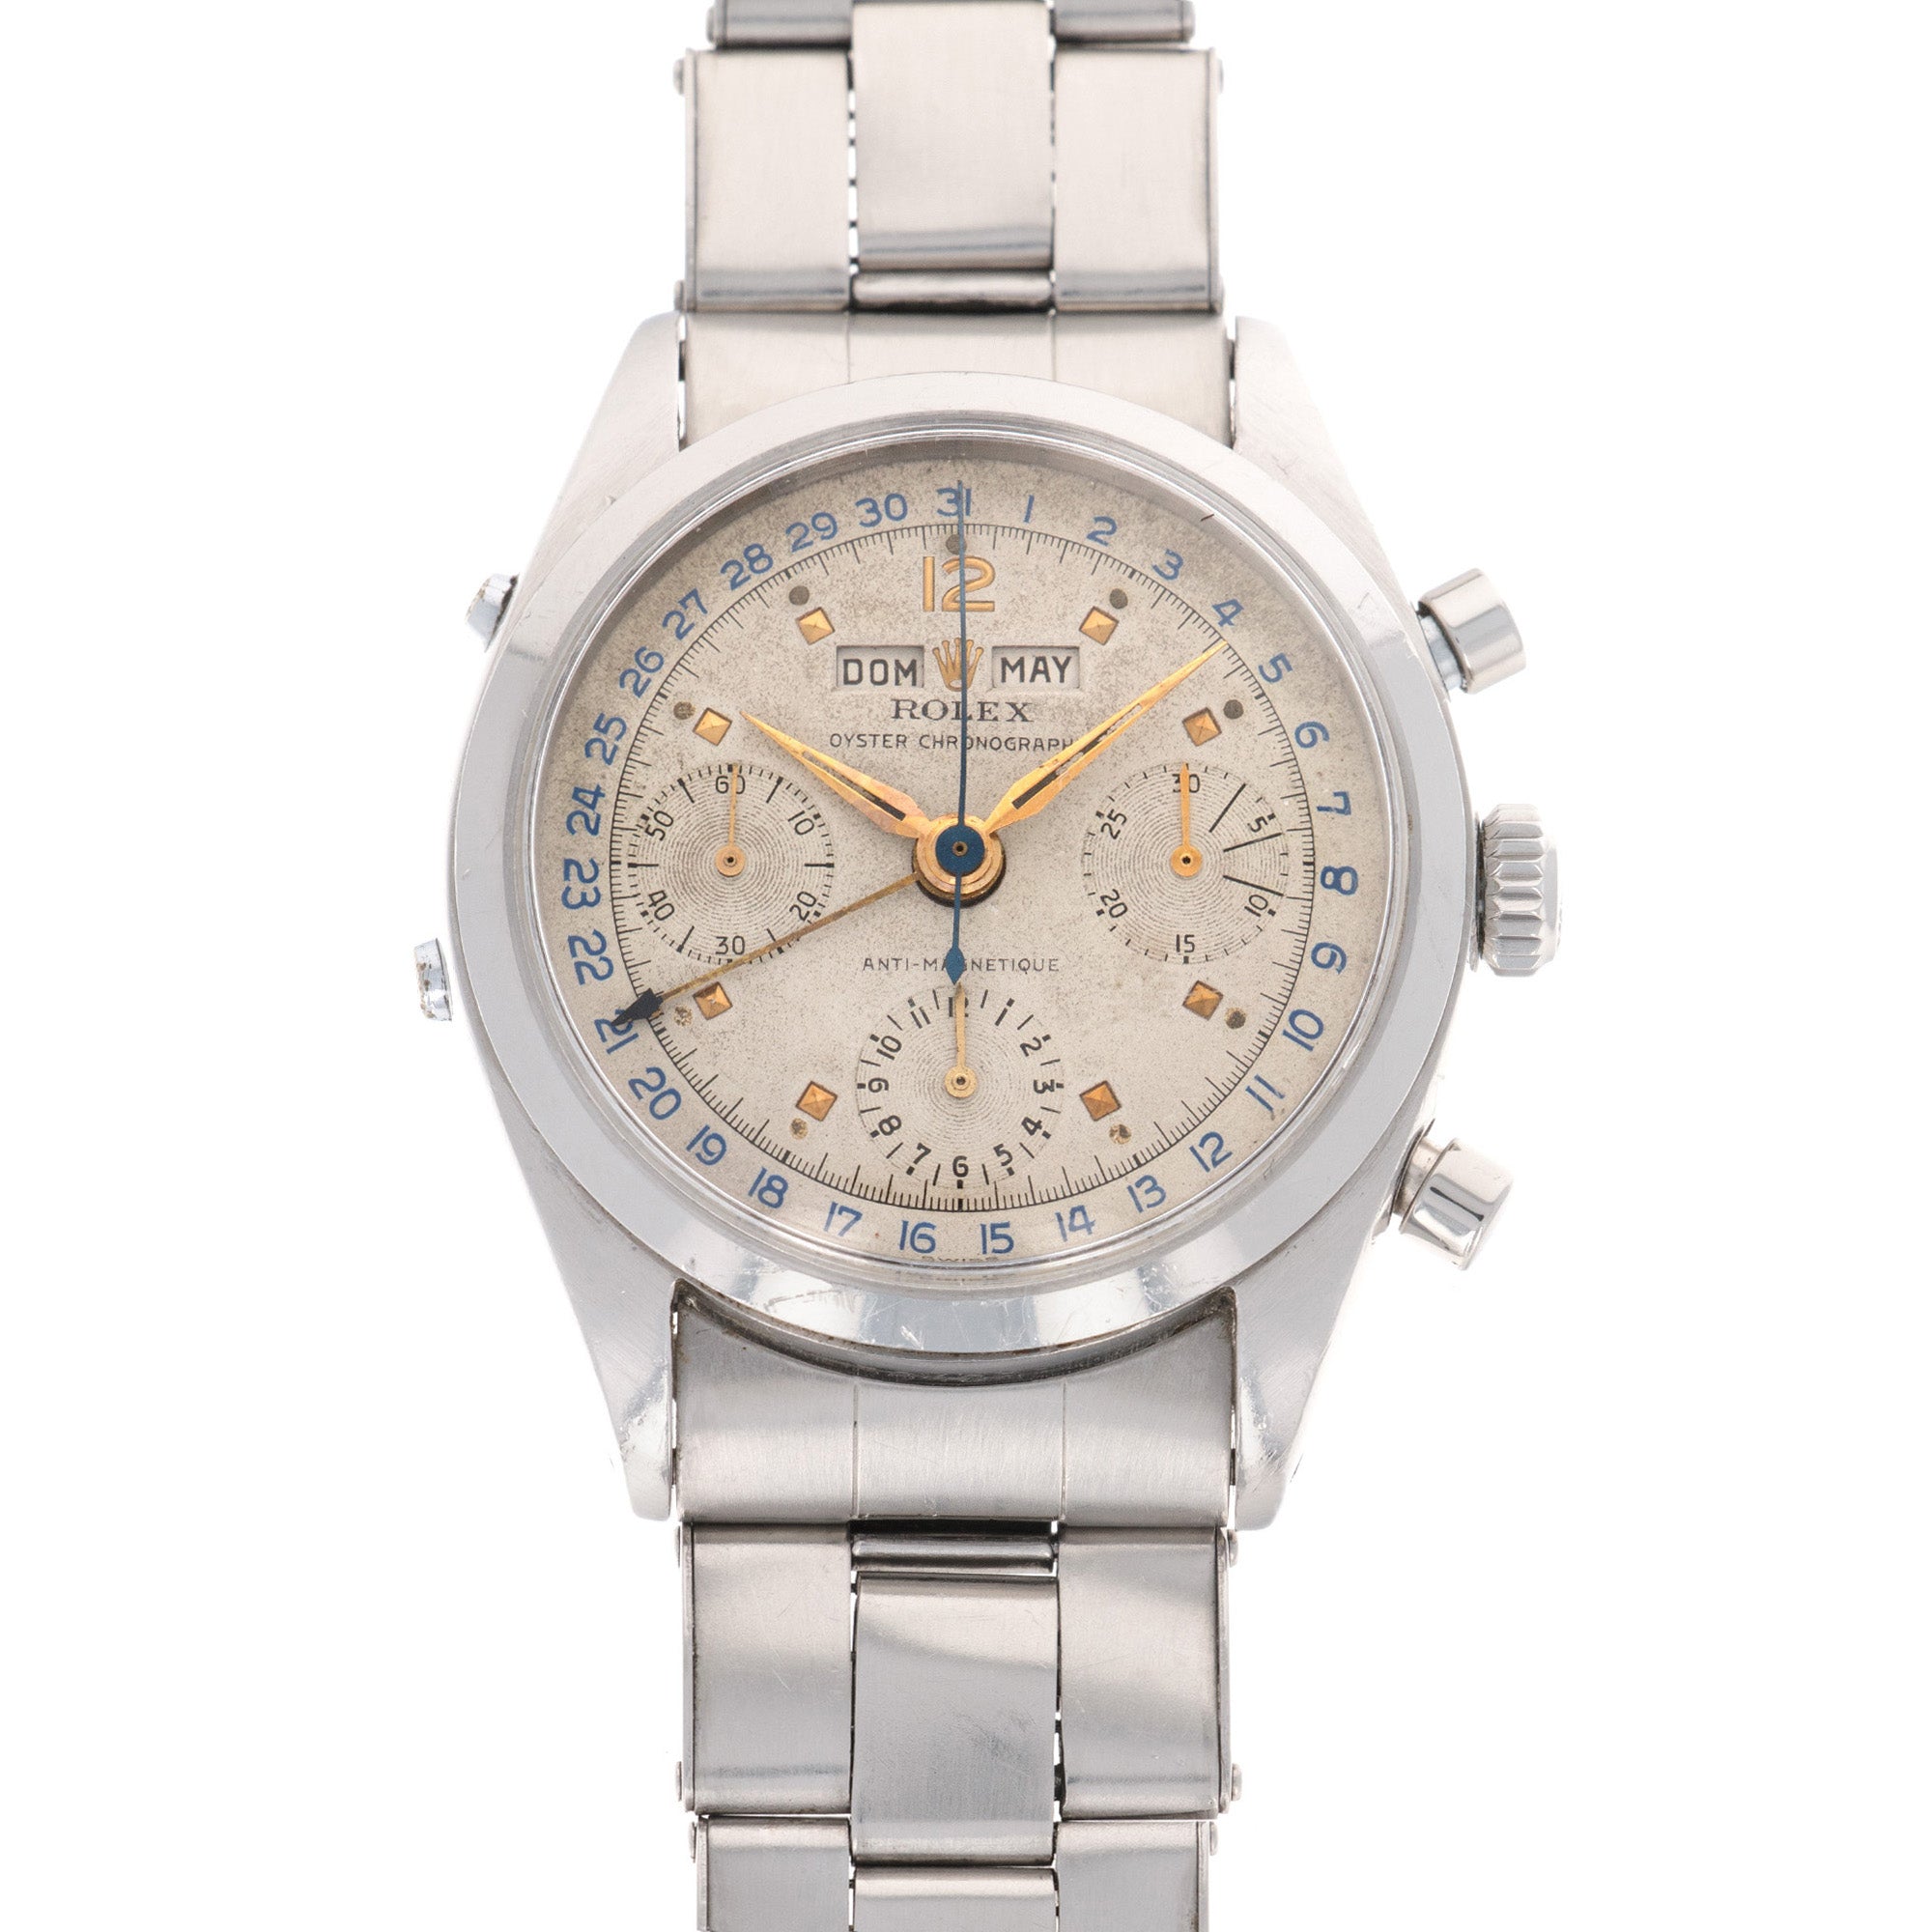 Rolex - Rolex Oyster Chronograph Jean Claude Killy Watch, Ref. 6236 - The Keystone Watches